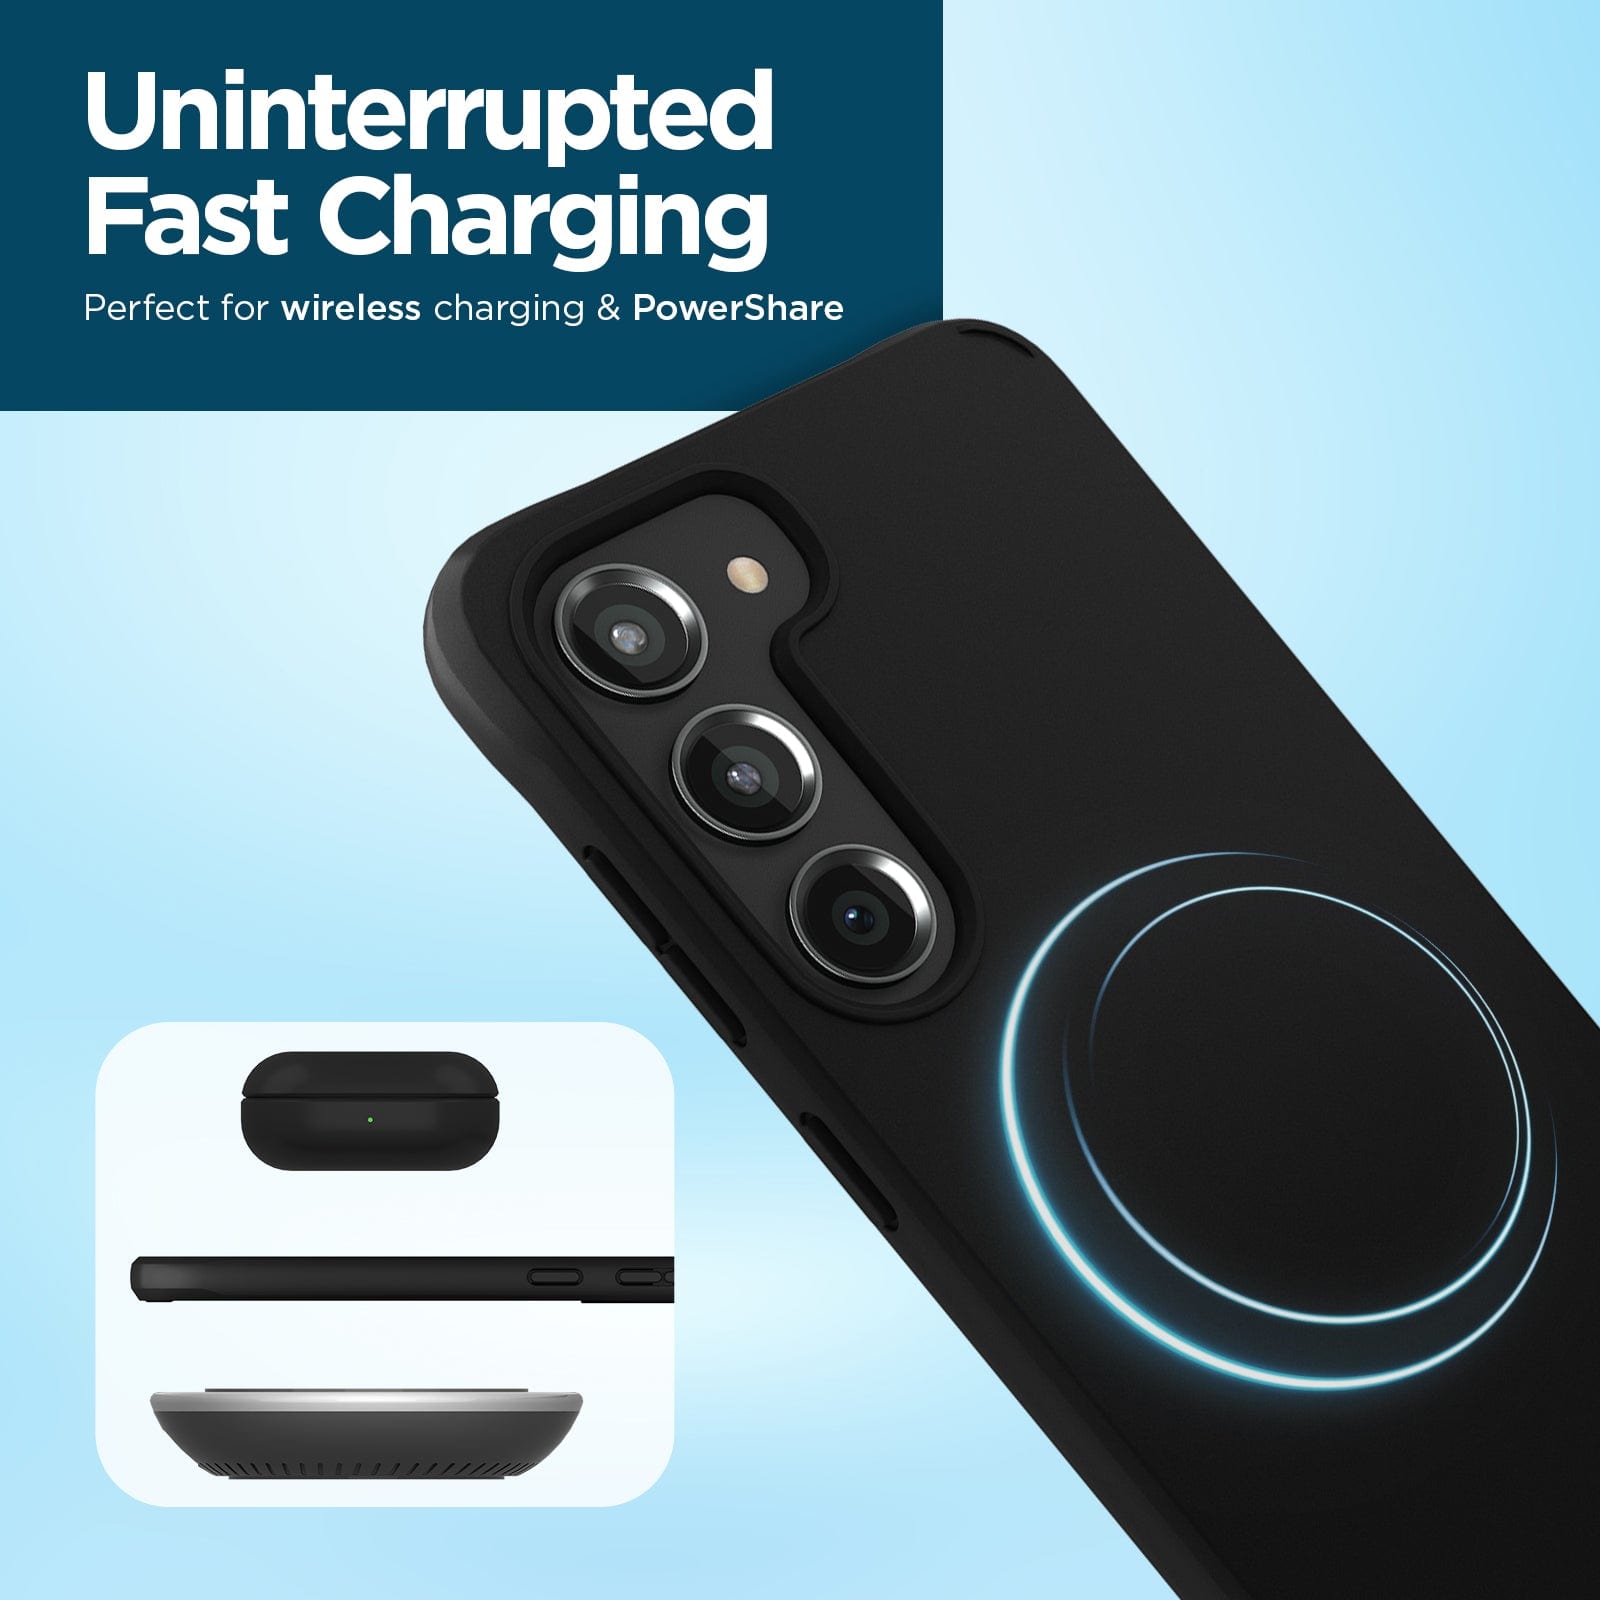 UNINTERRUPTED FAST CHARGING. PERFECT FOR WIRELESS CHARGING & POWERSHARE.